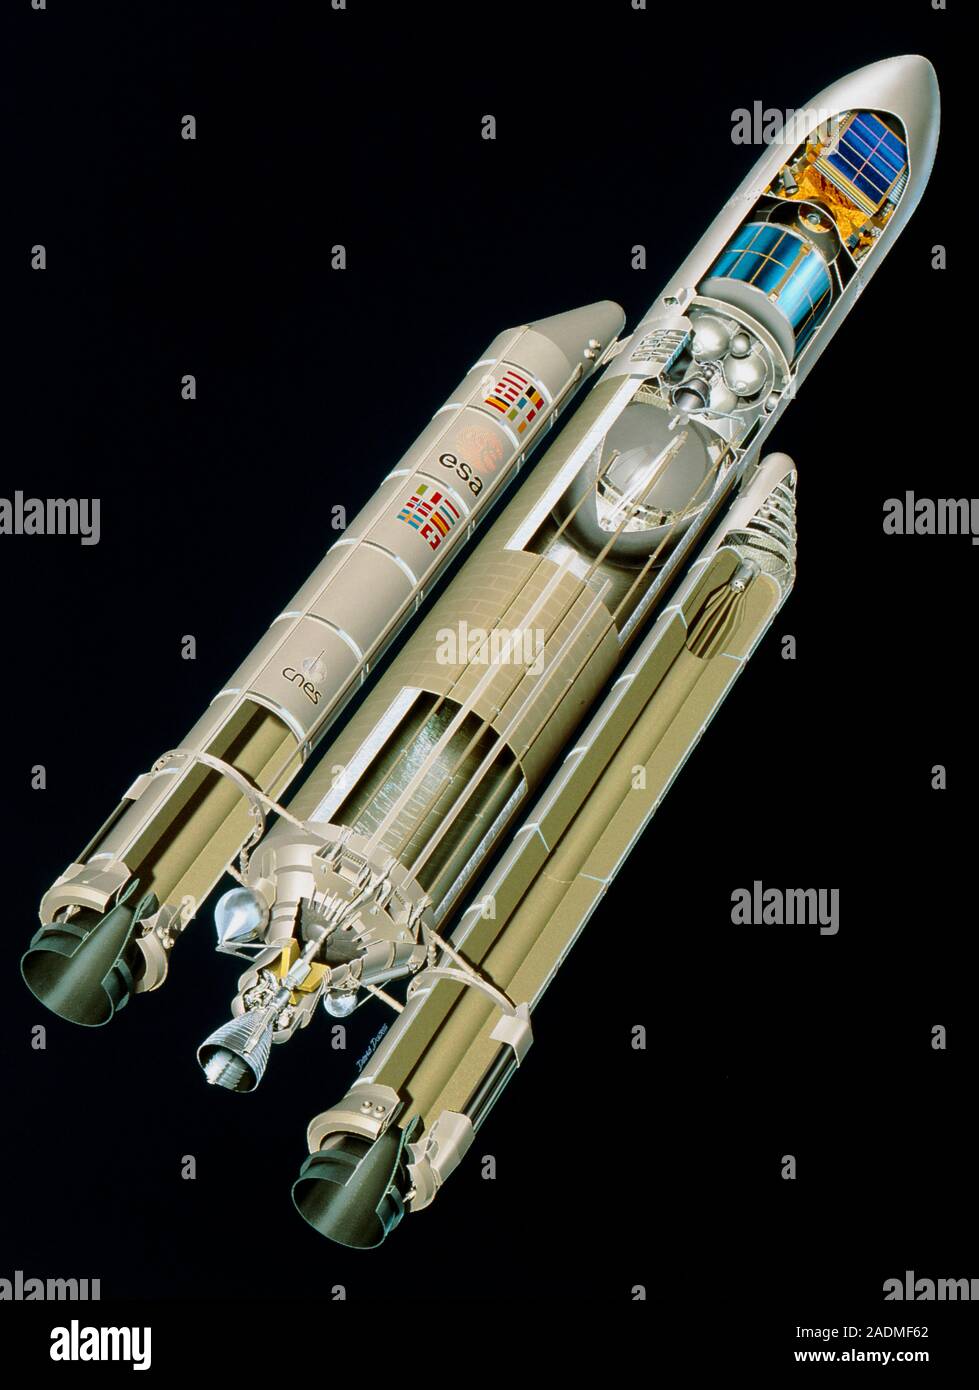 Ariane 5 rocket. Artwork showing a cut-away view of the European Ariane 5 launcher. Ariane 5 consists of a large first stage (lower 2/3rds of the cent Stock Photo